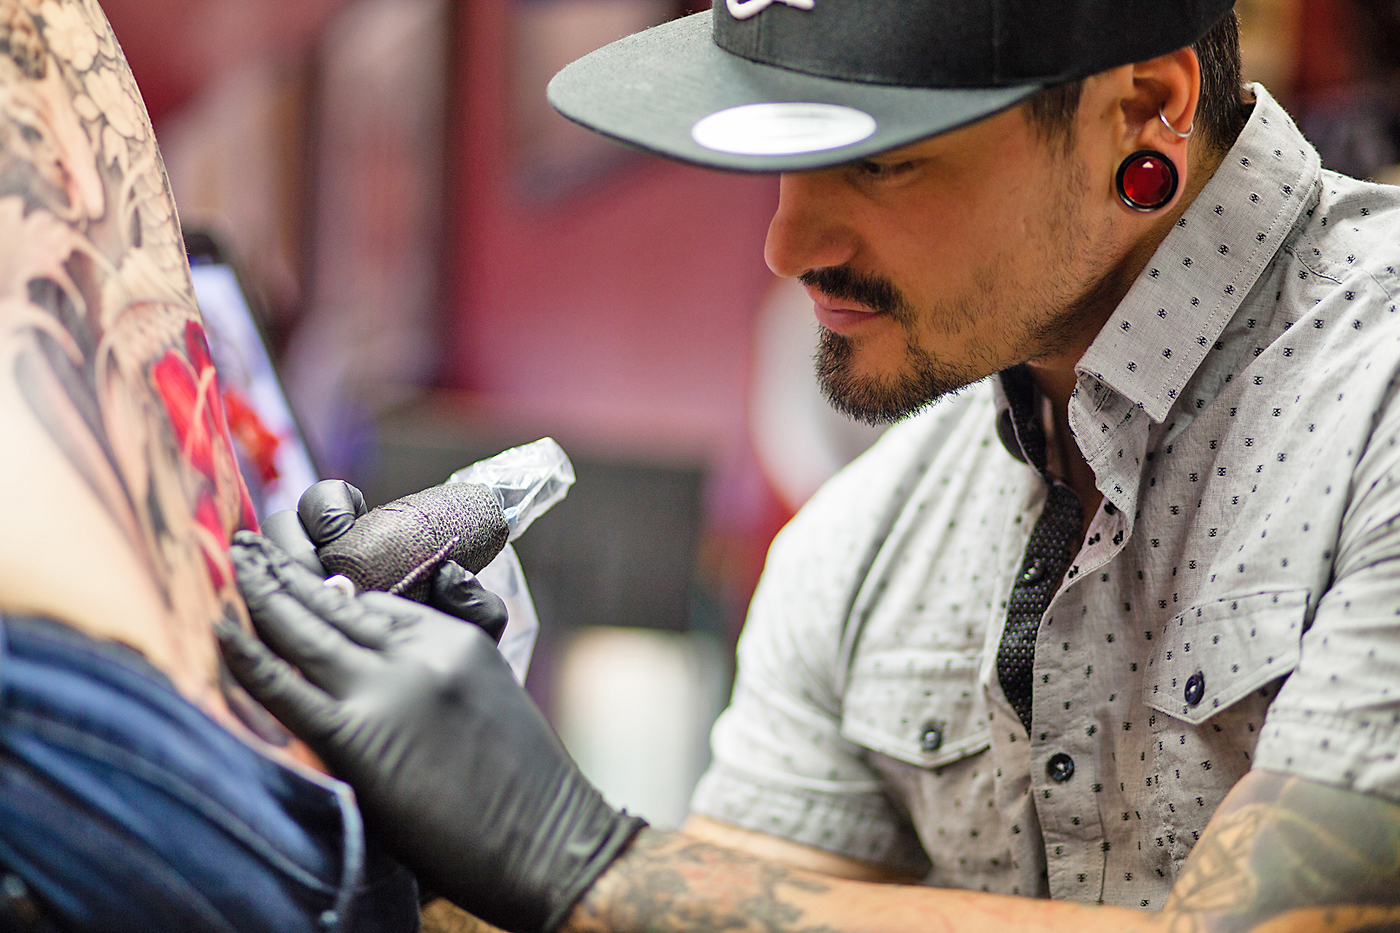 Just a desperate dreamer — Johnny Depp getting a new tattoo at The Grand...